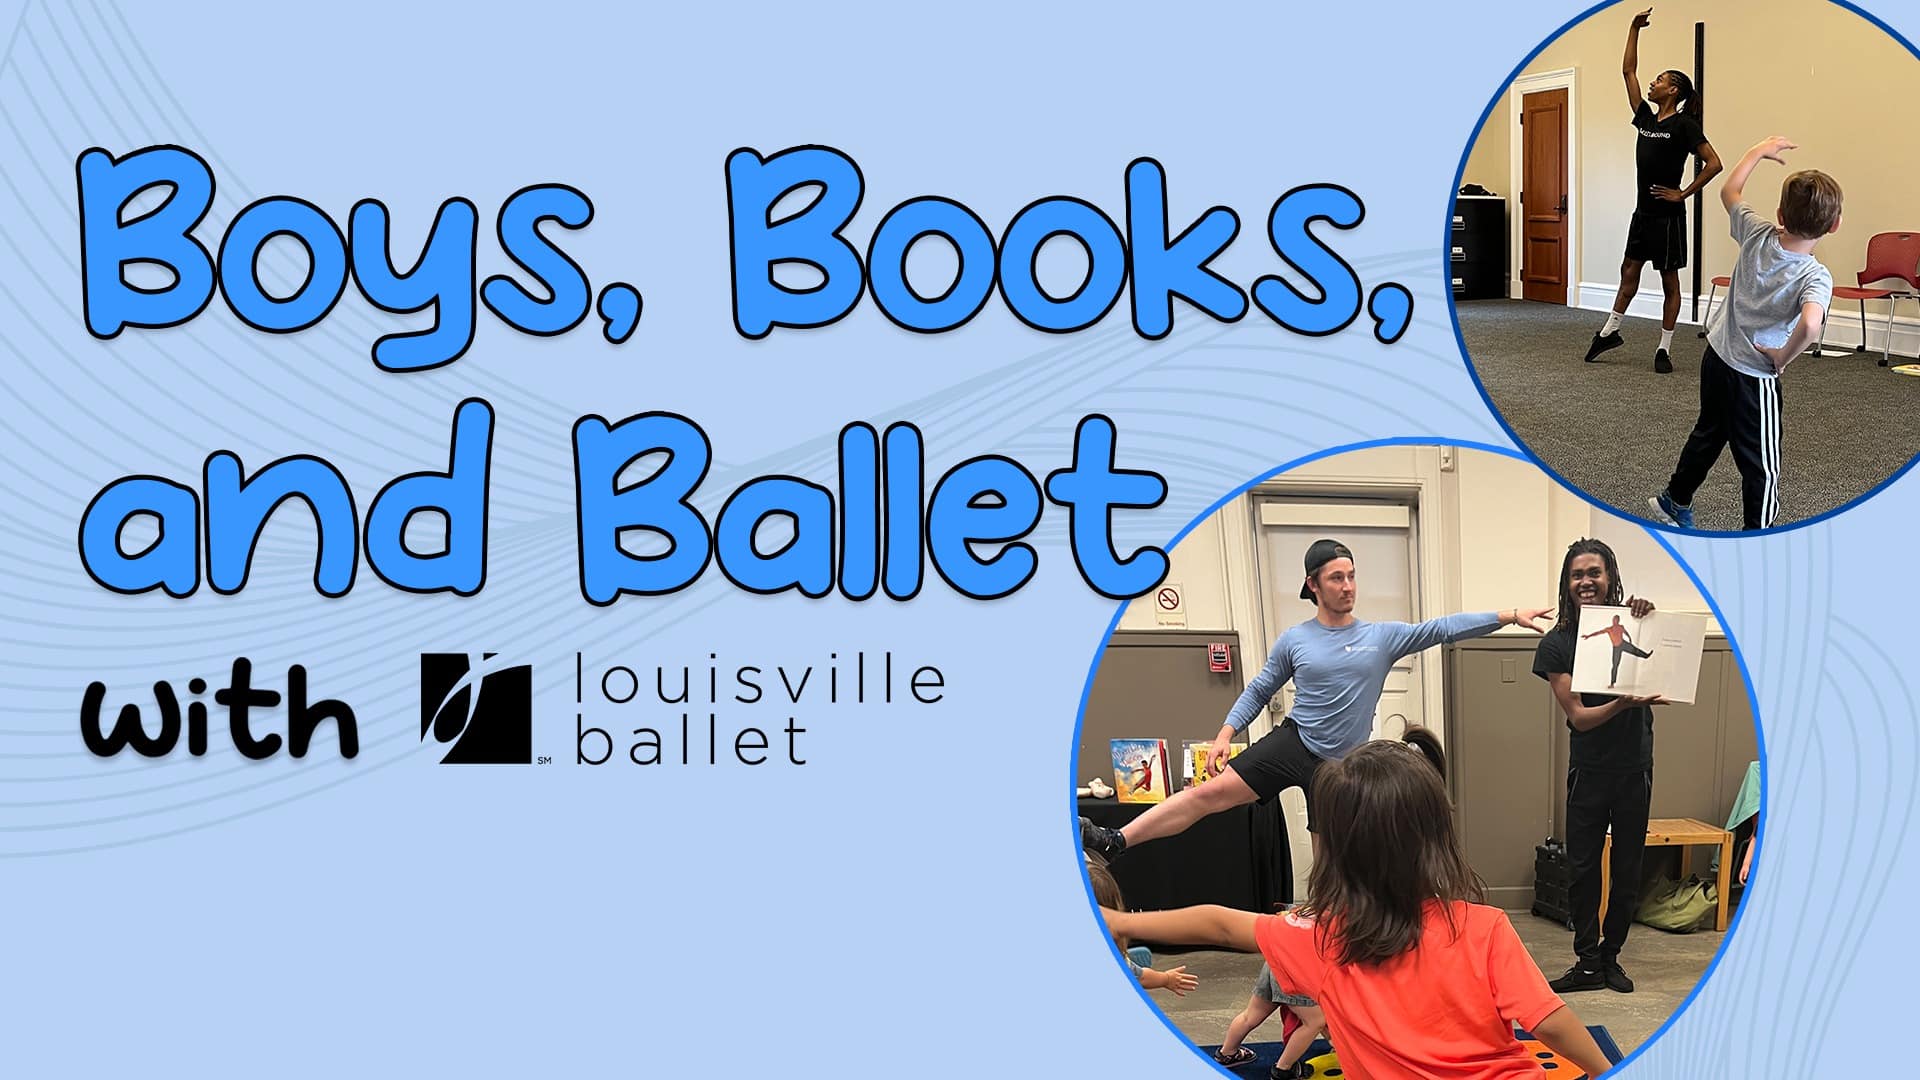 Boys, Books, and Ballet with Louisville Ballet